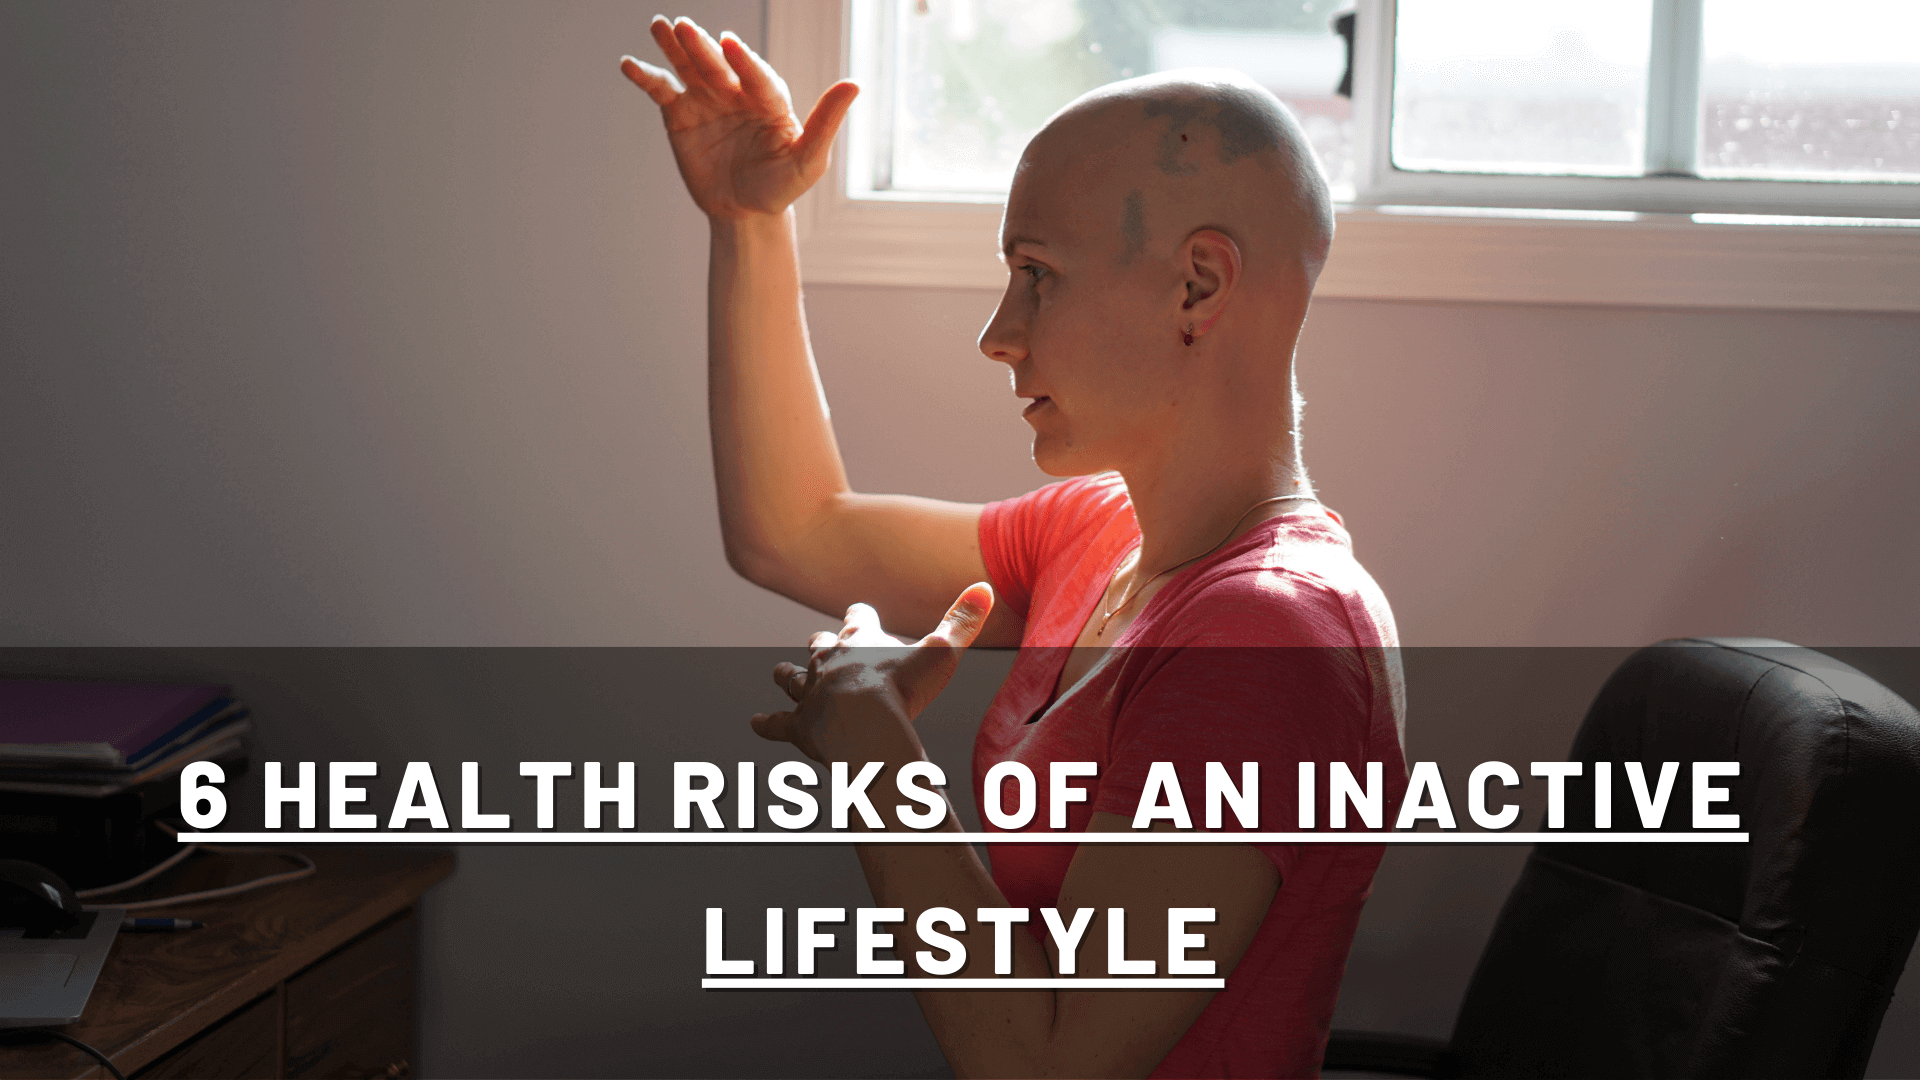 6 Health Risks of an Inactive Lifestyle